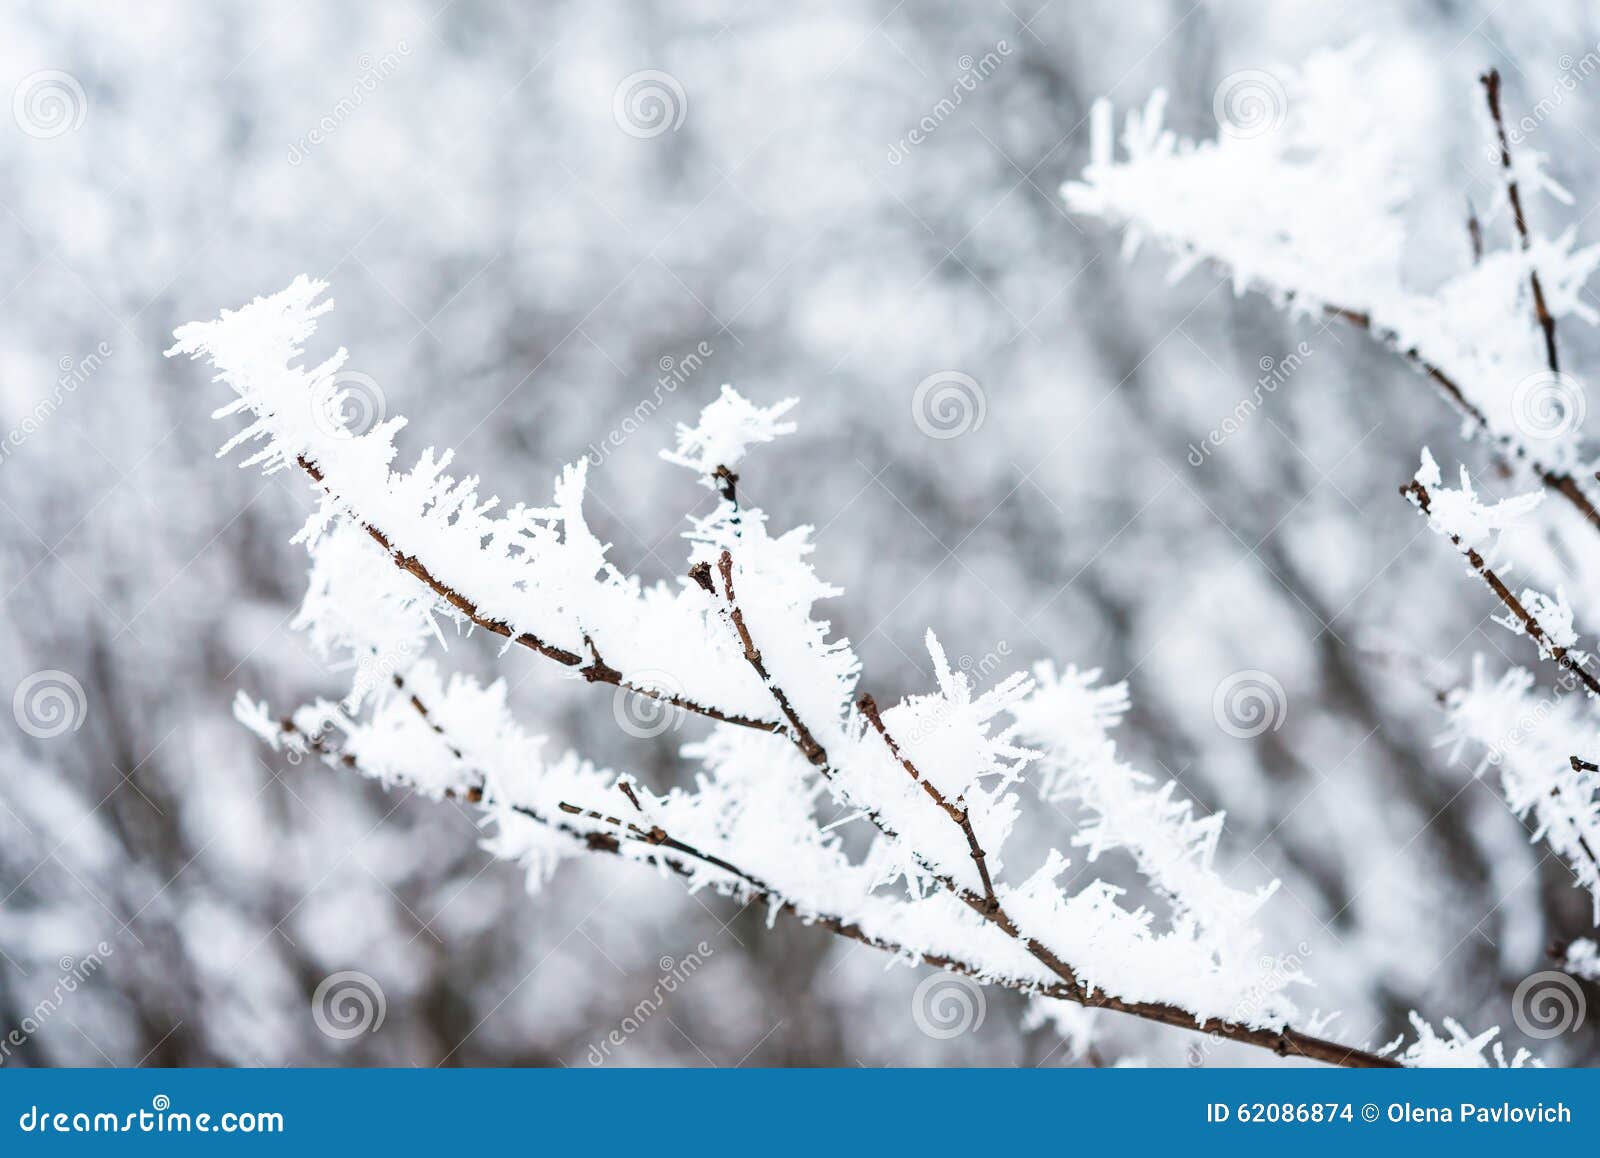 Ice Crystals on Tree Branches Stock Photo - Image of nature, vintage ...